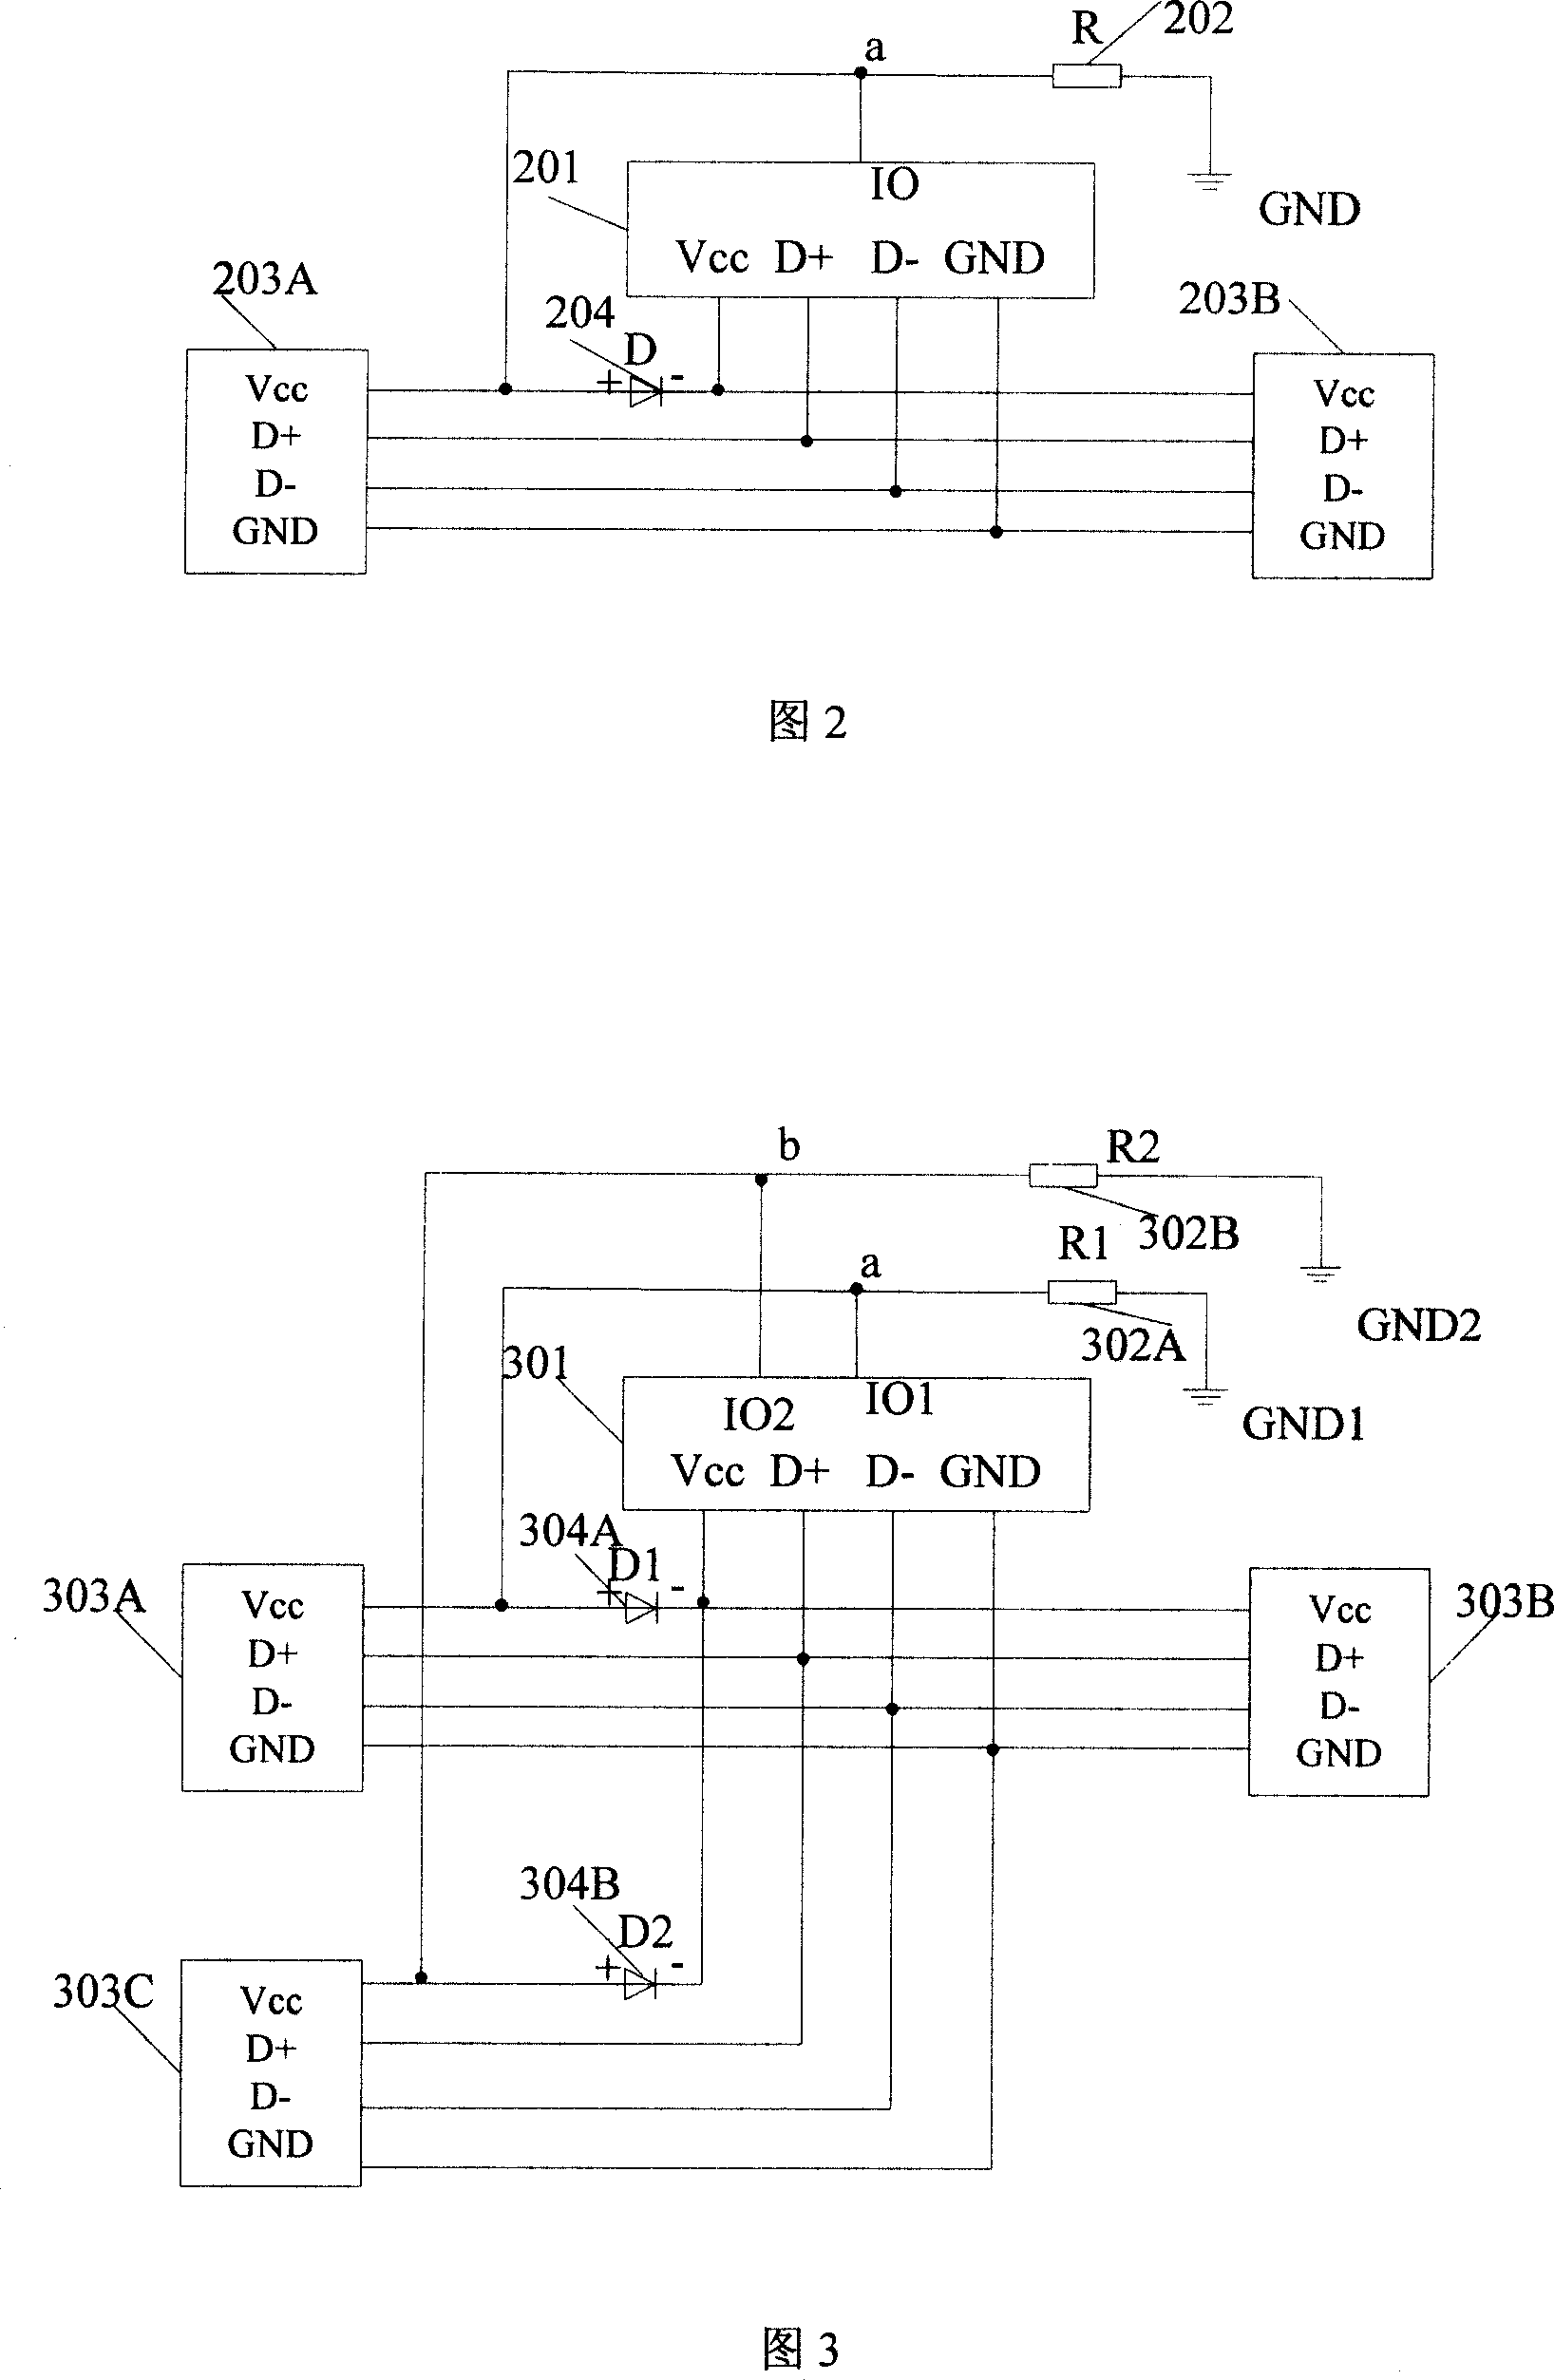 Information safety apparatus having multiple interface and capable of being automatically installed and controlling method therefor